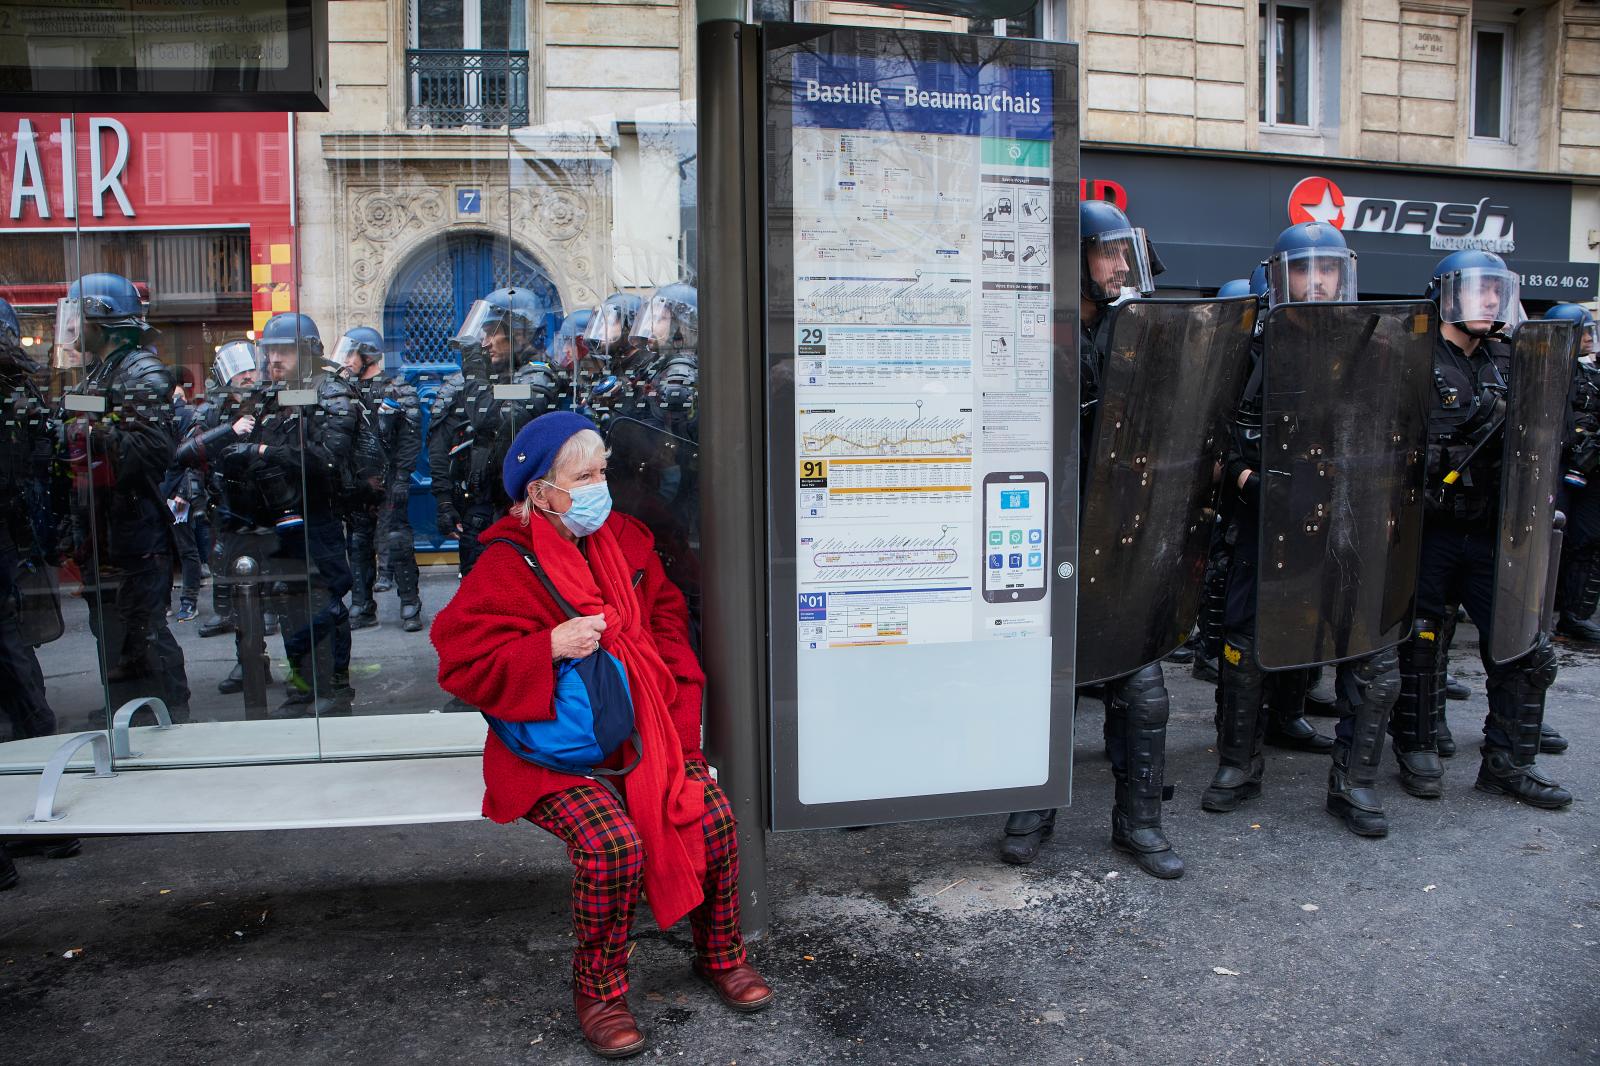 Protests in Paris against pension reform plans | Buy this image